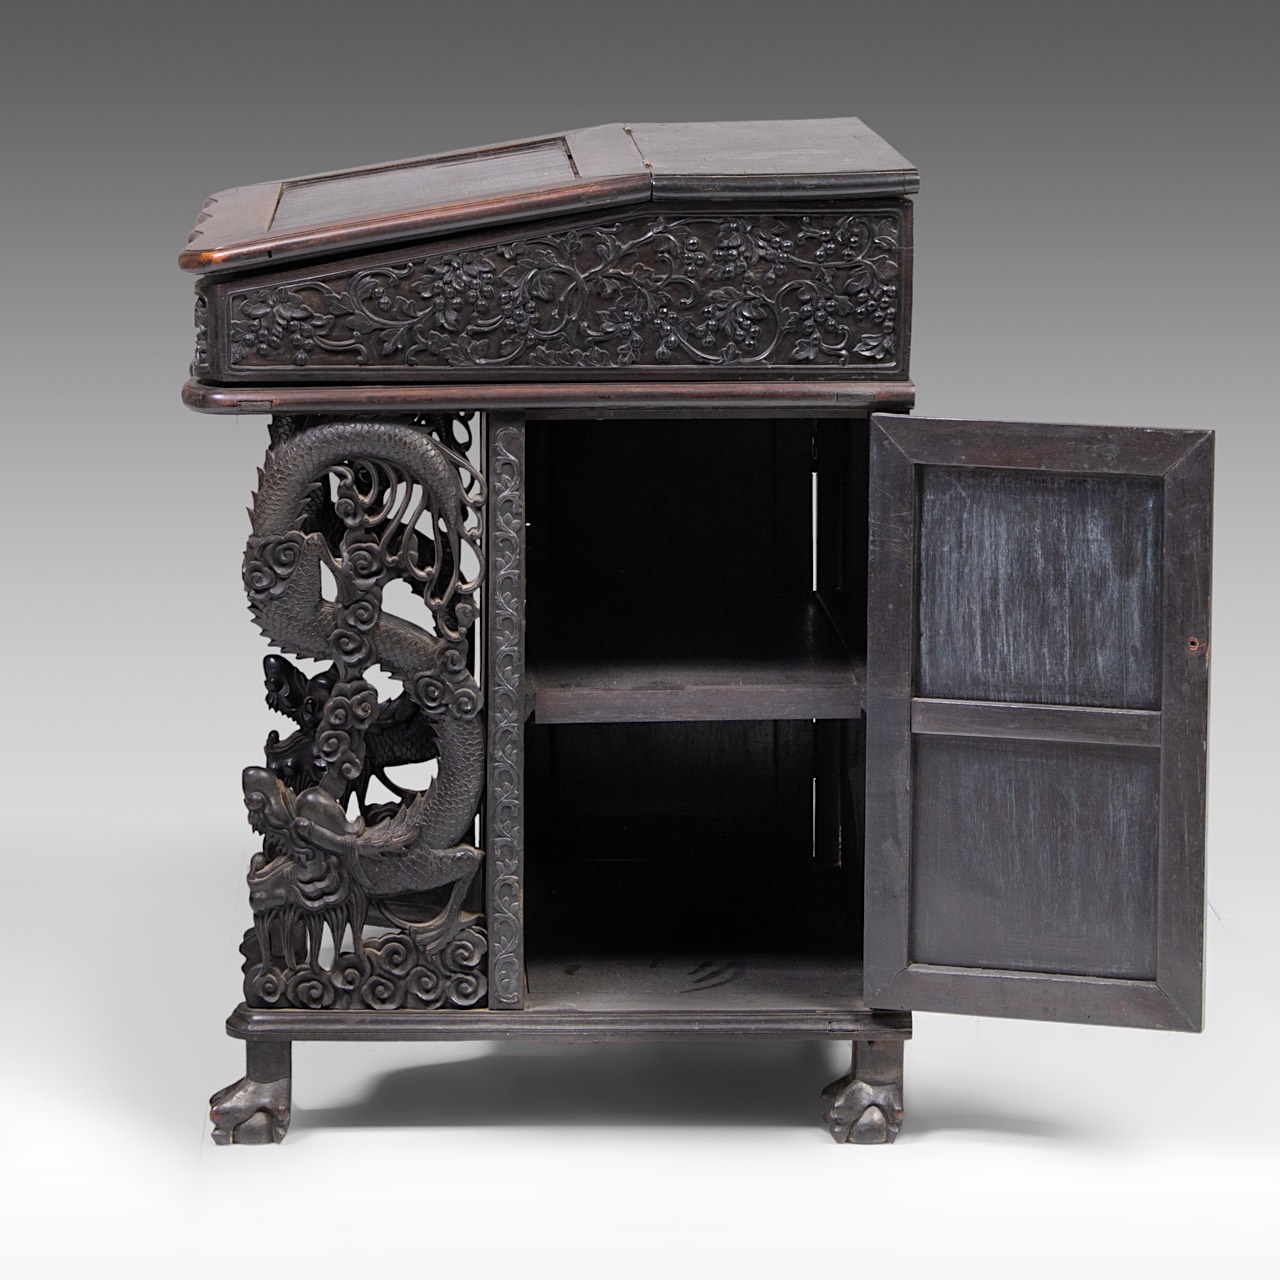 A compact South Chinese carved hardwood writing desk, 19thC, H 83 - W 66 - D 62 cm - Bild 3 aus 10